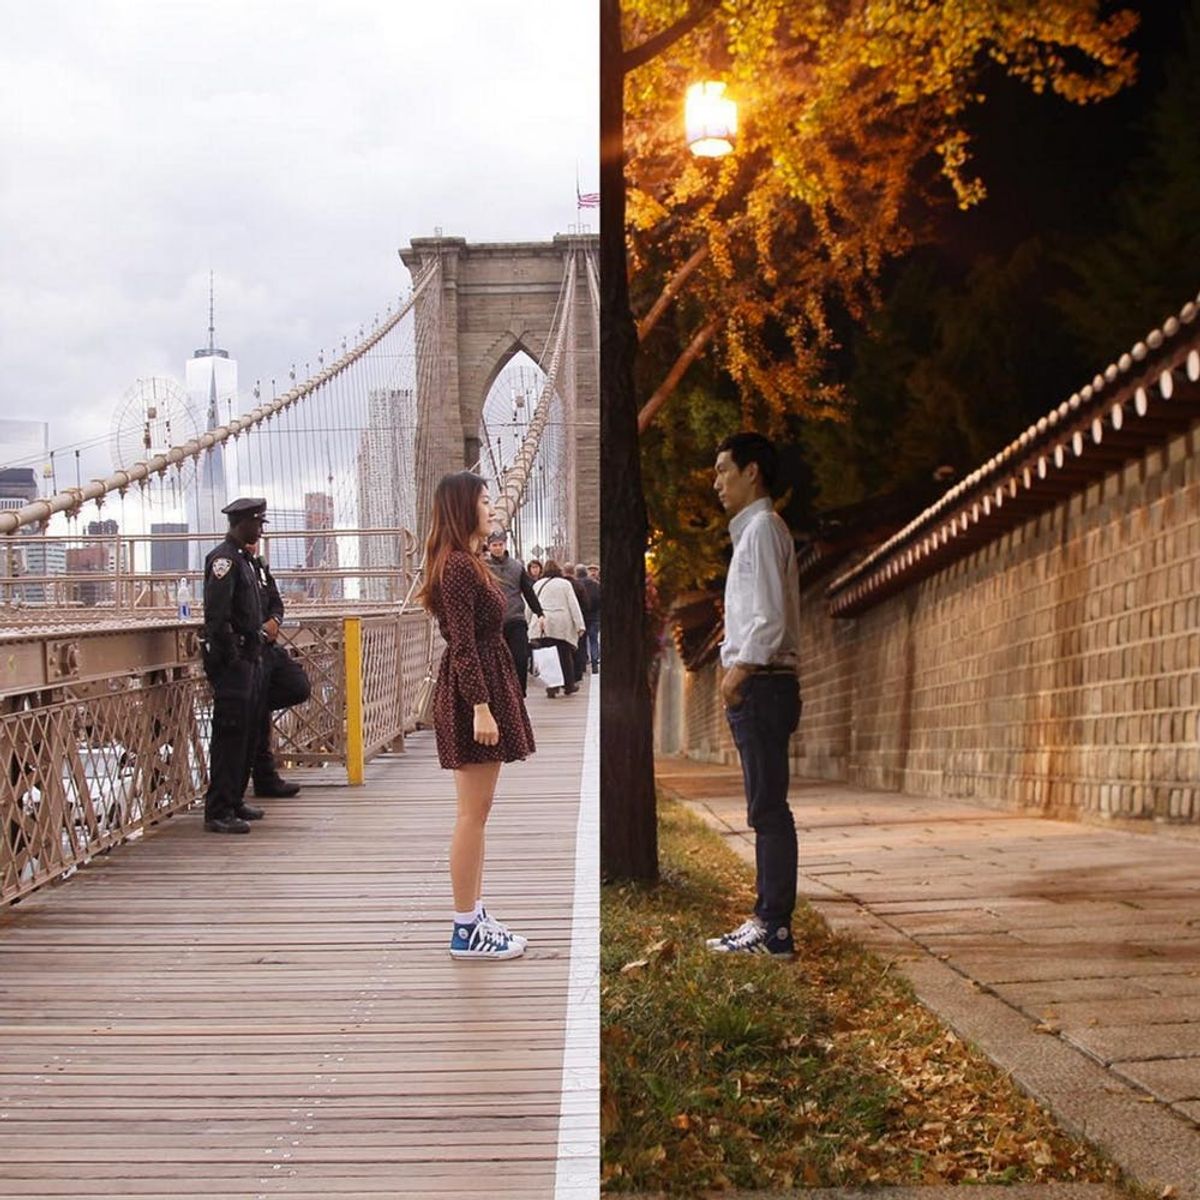 How This Couple Turned Their Long-Distance Relationship into an Art Project